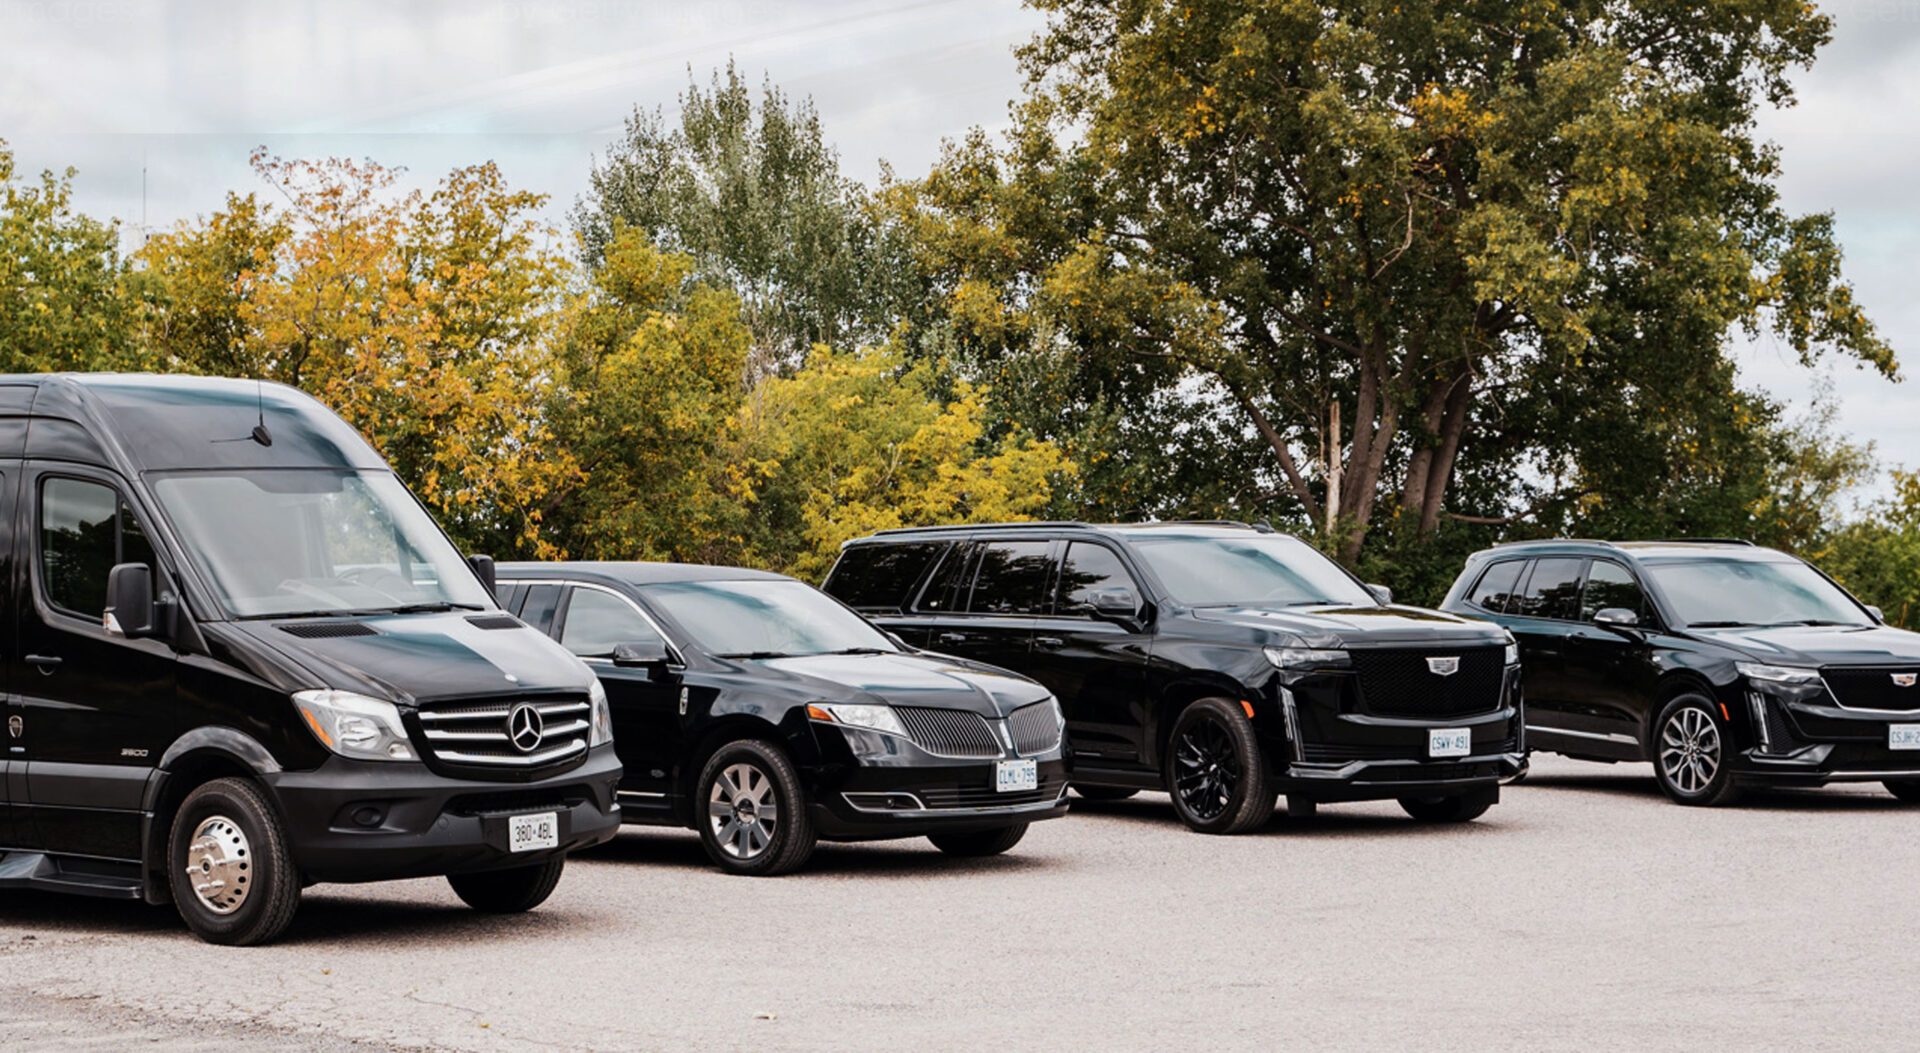 Ride in style with our luxurious fleet